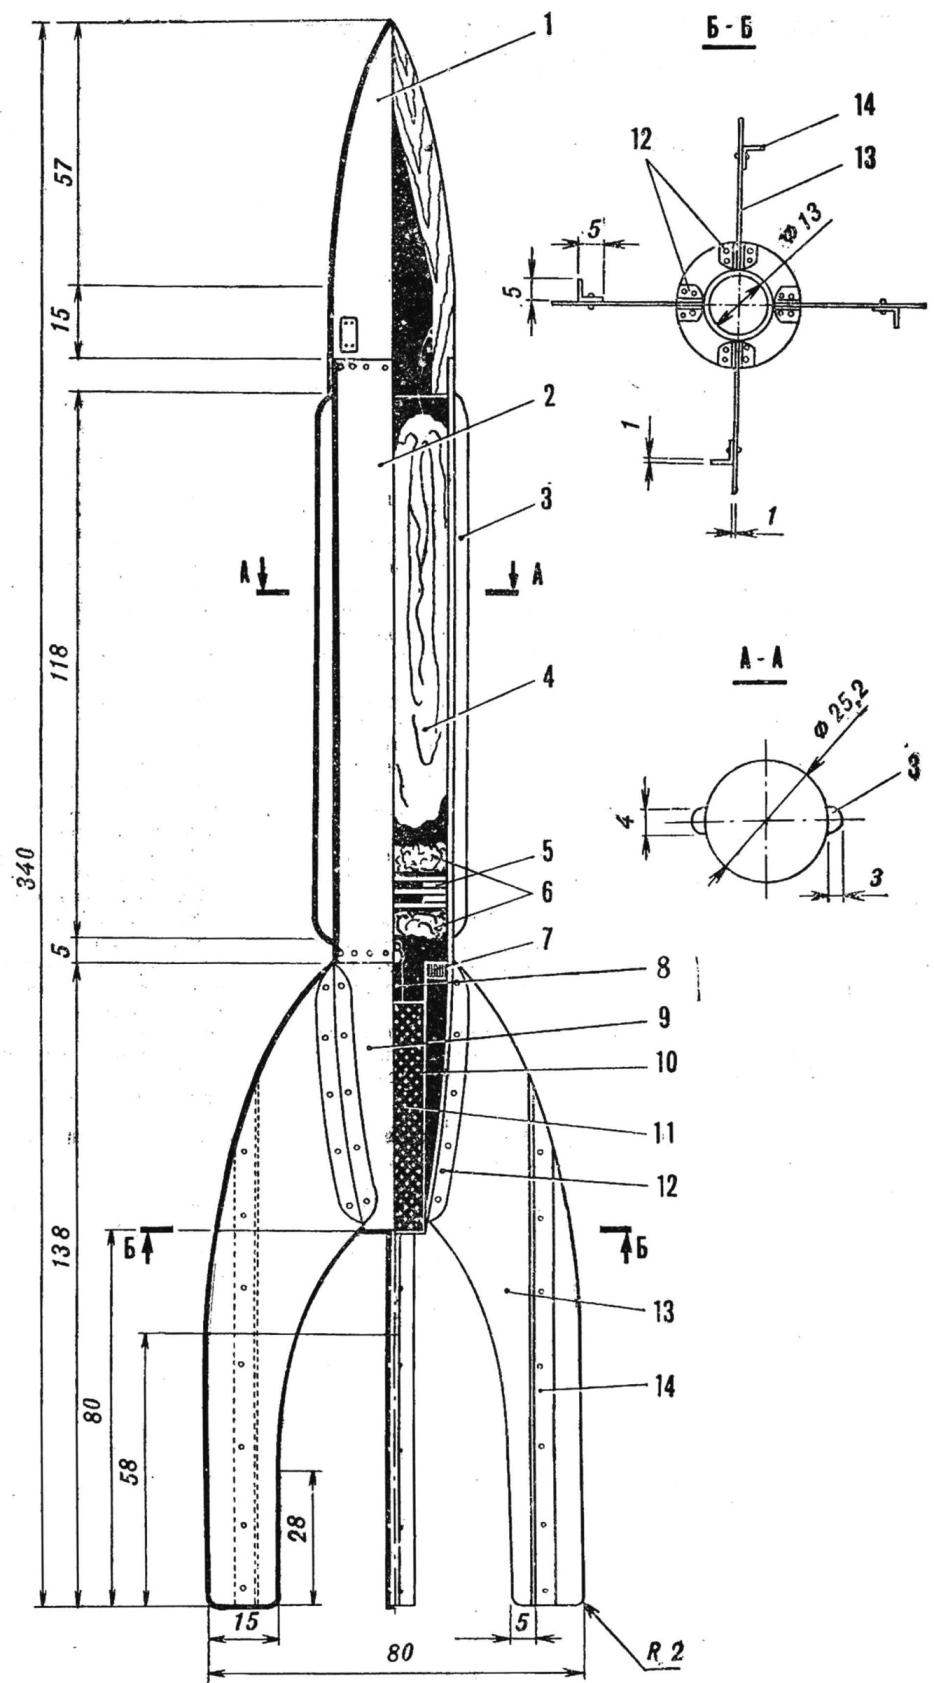 Fig. 1. Diagram of the device of the experimental R-06